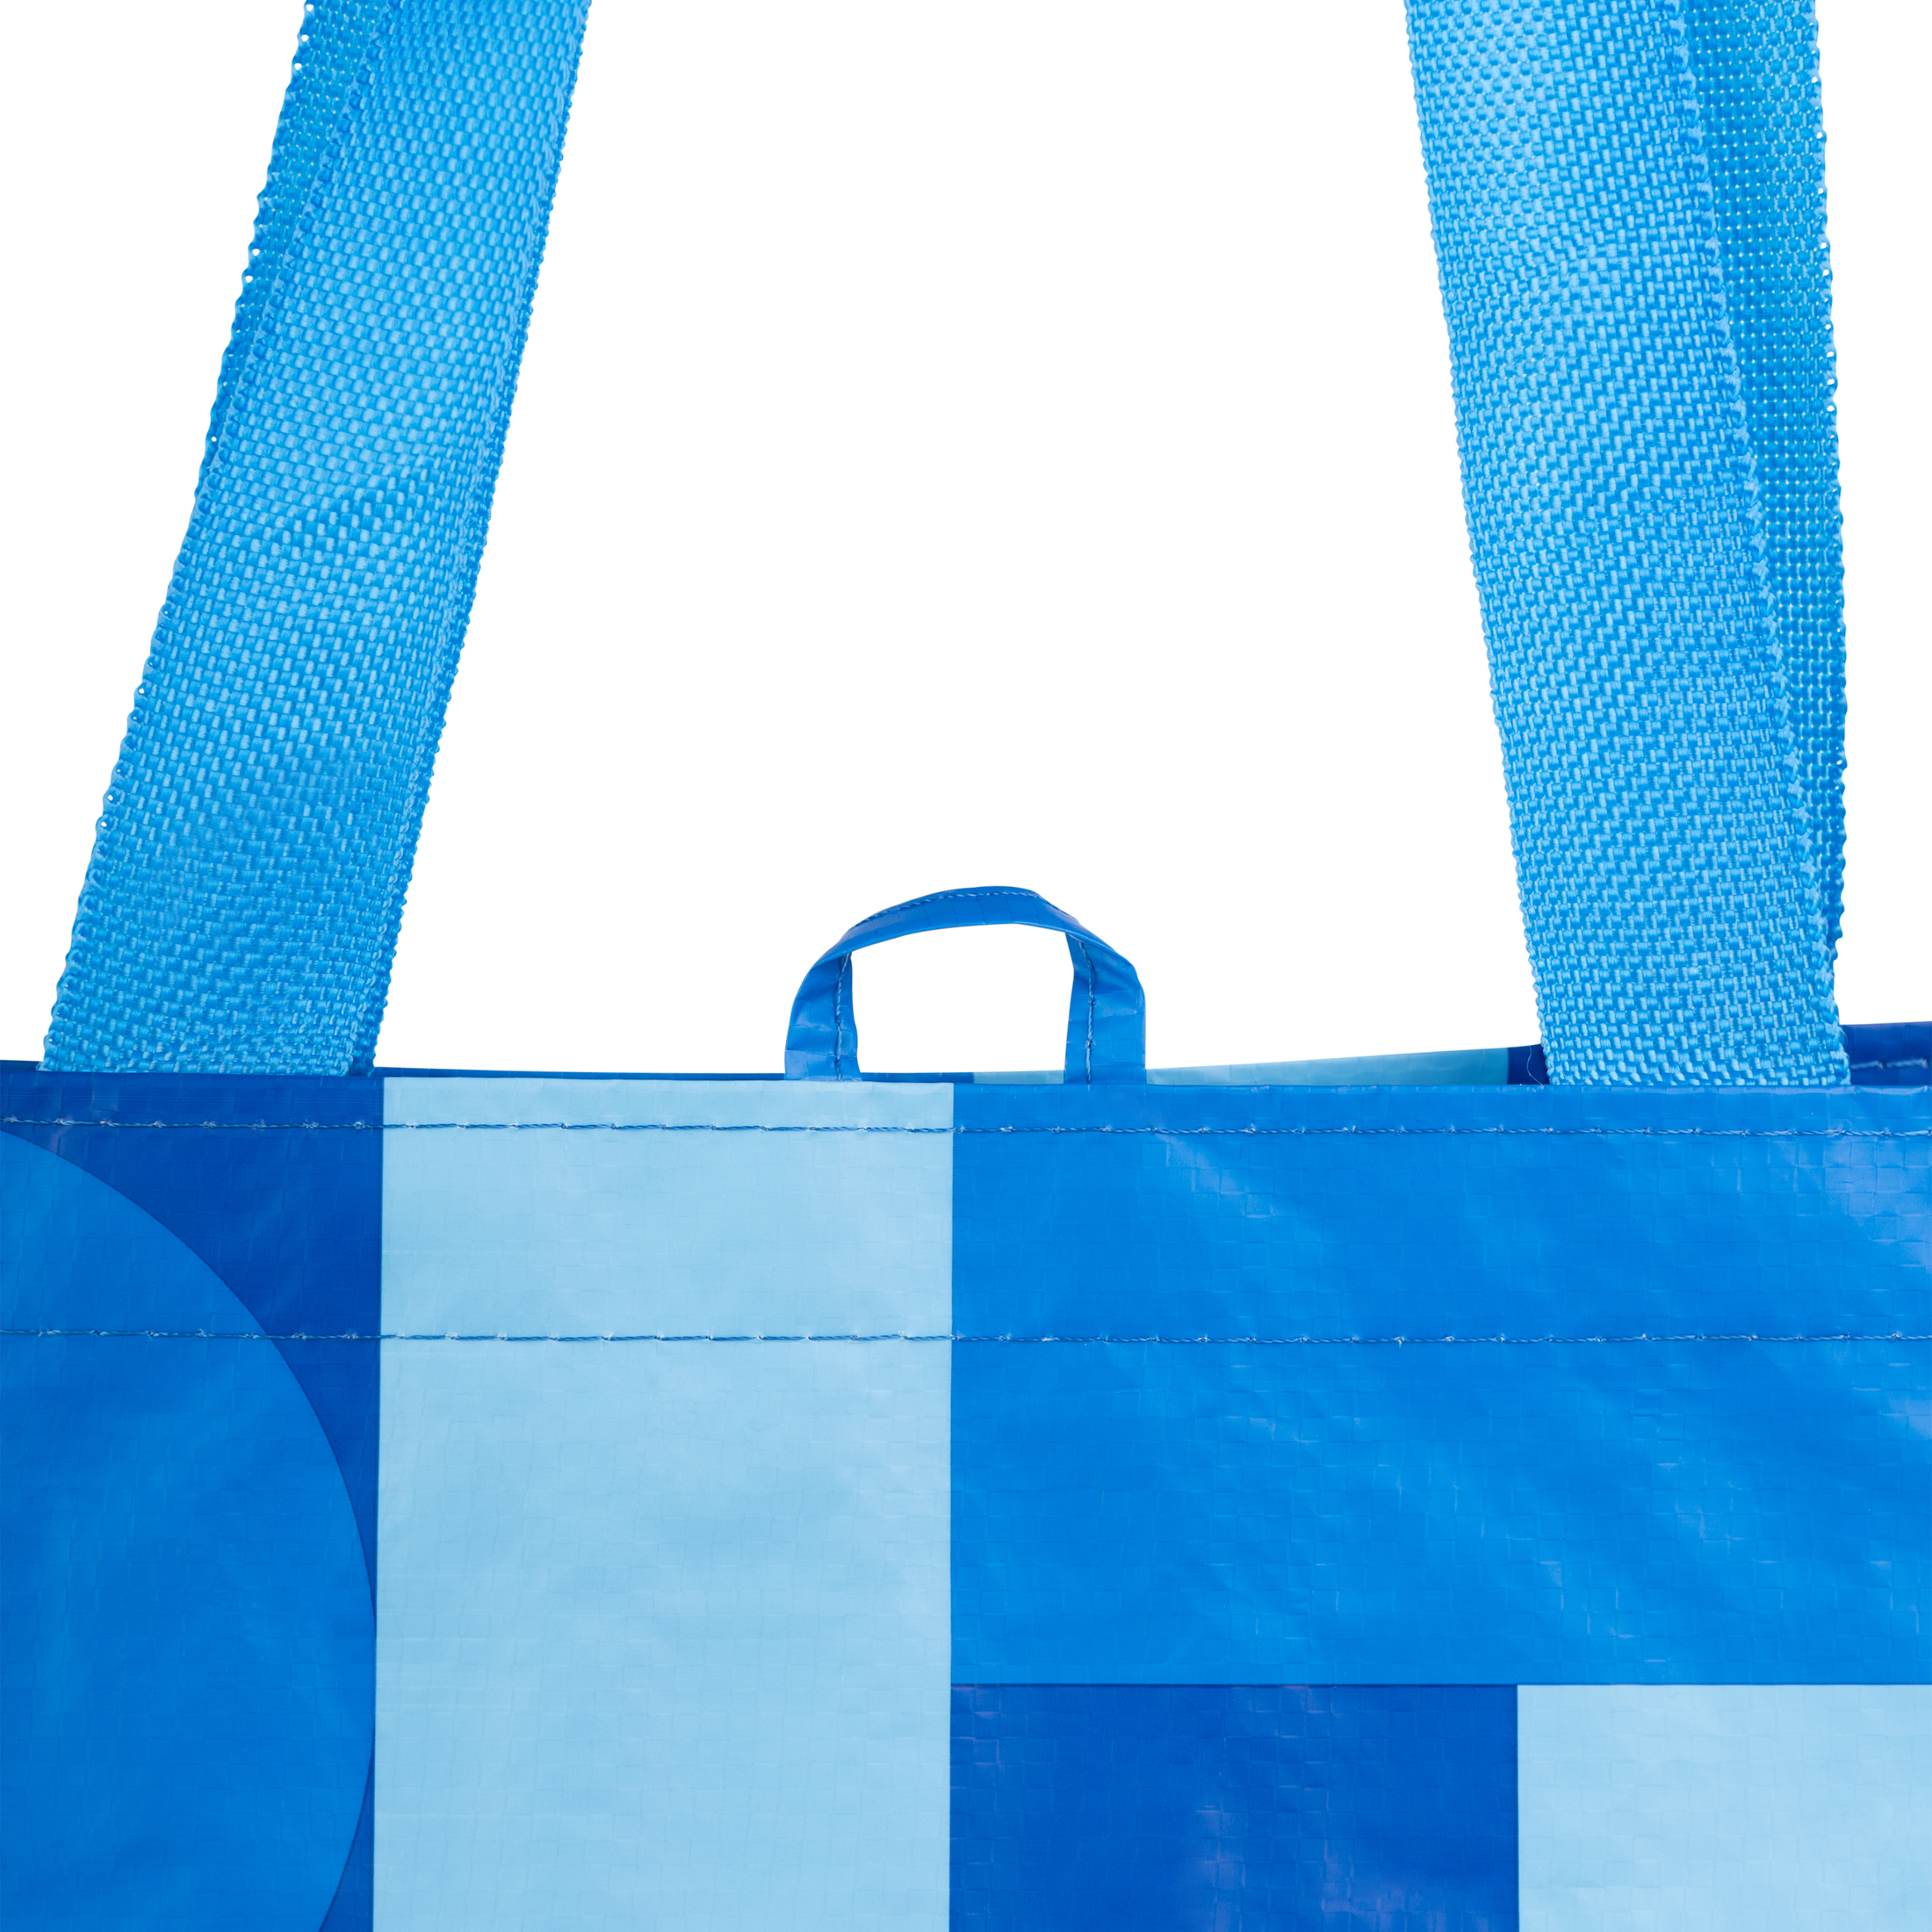 Reusable, Multi-Functional Wide Grocery Bag, Blue and Yellow Abstract Design - image 3 of 5